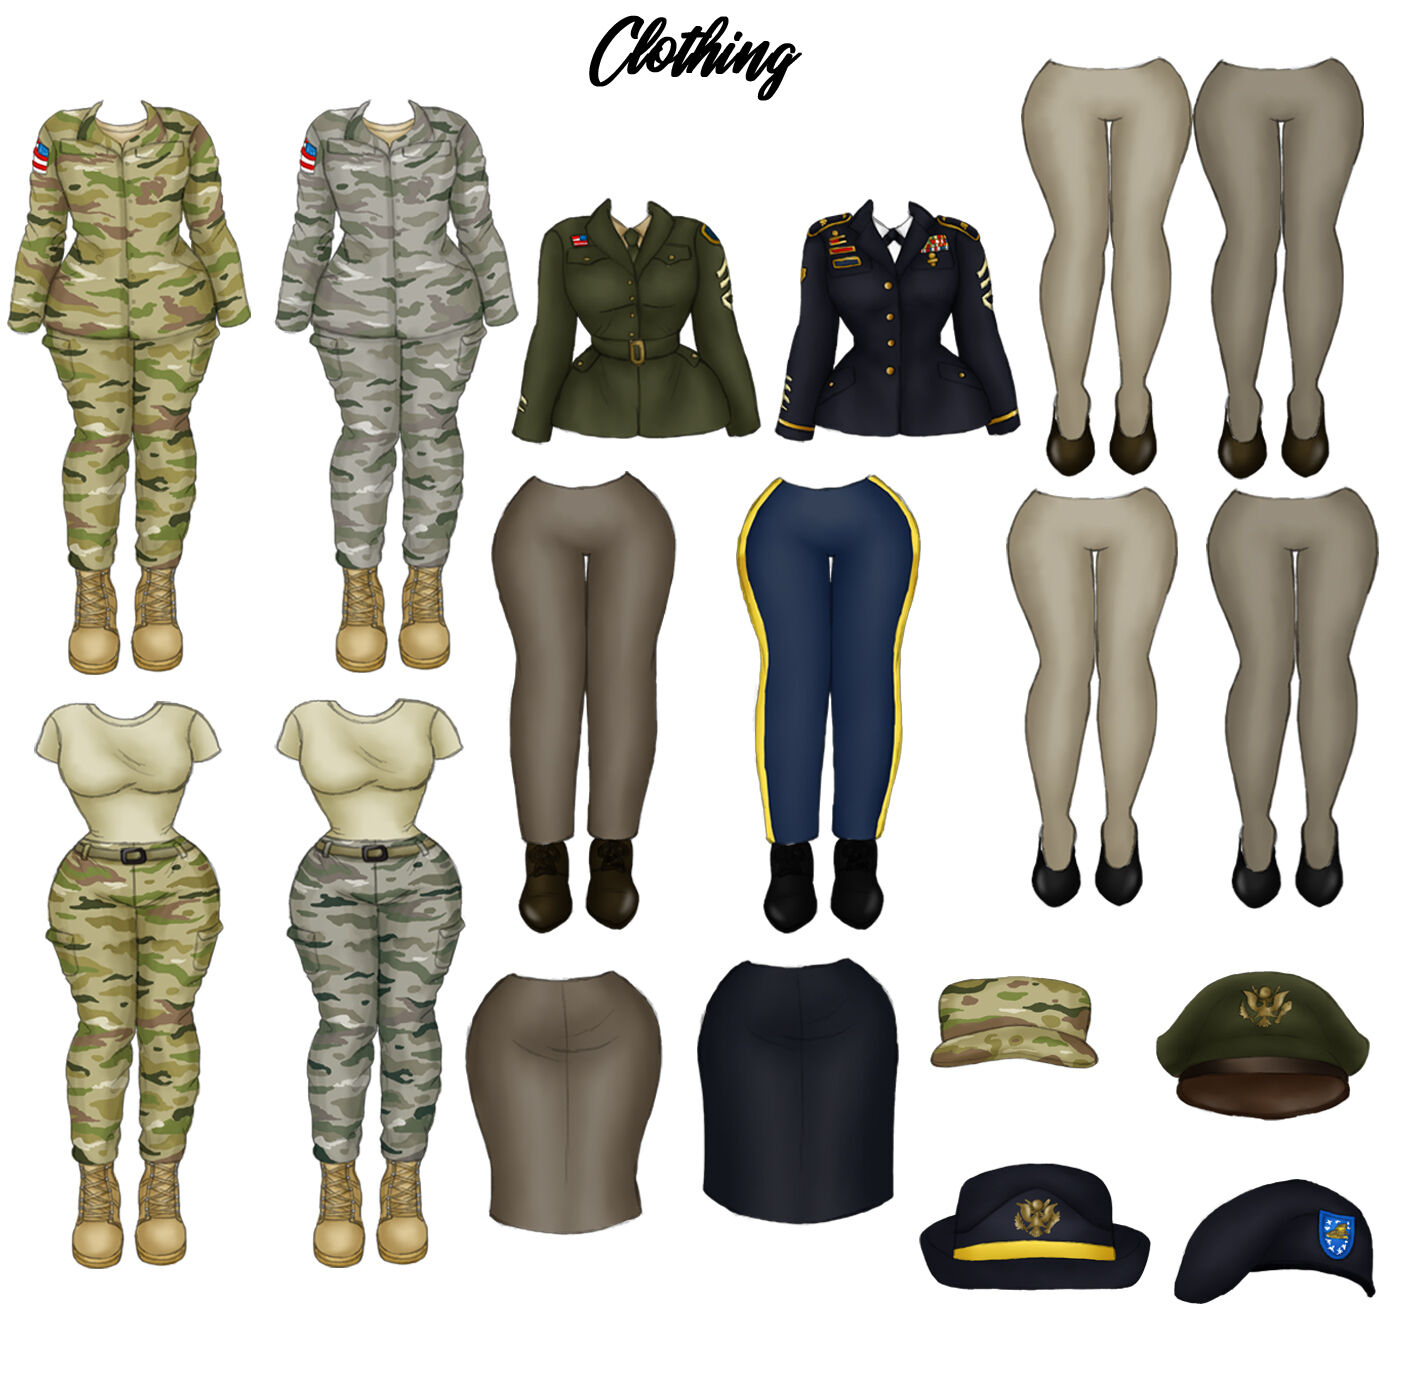 militaire clipart of flowers